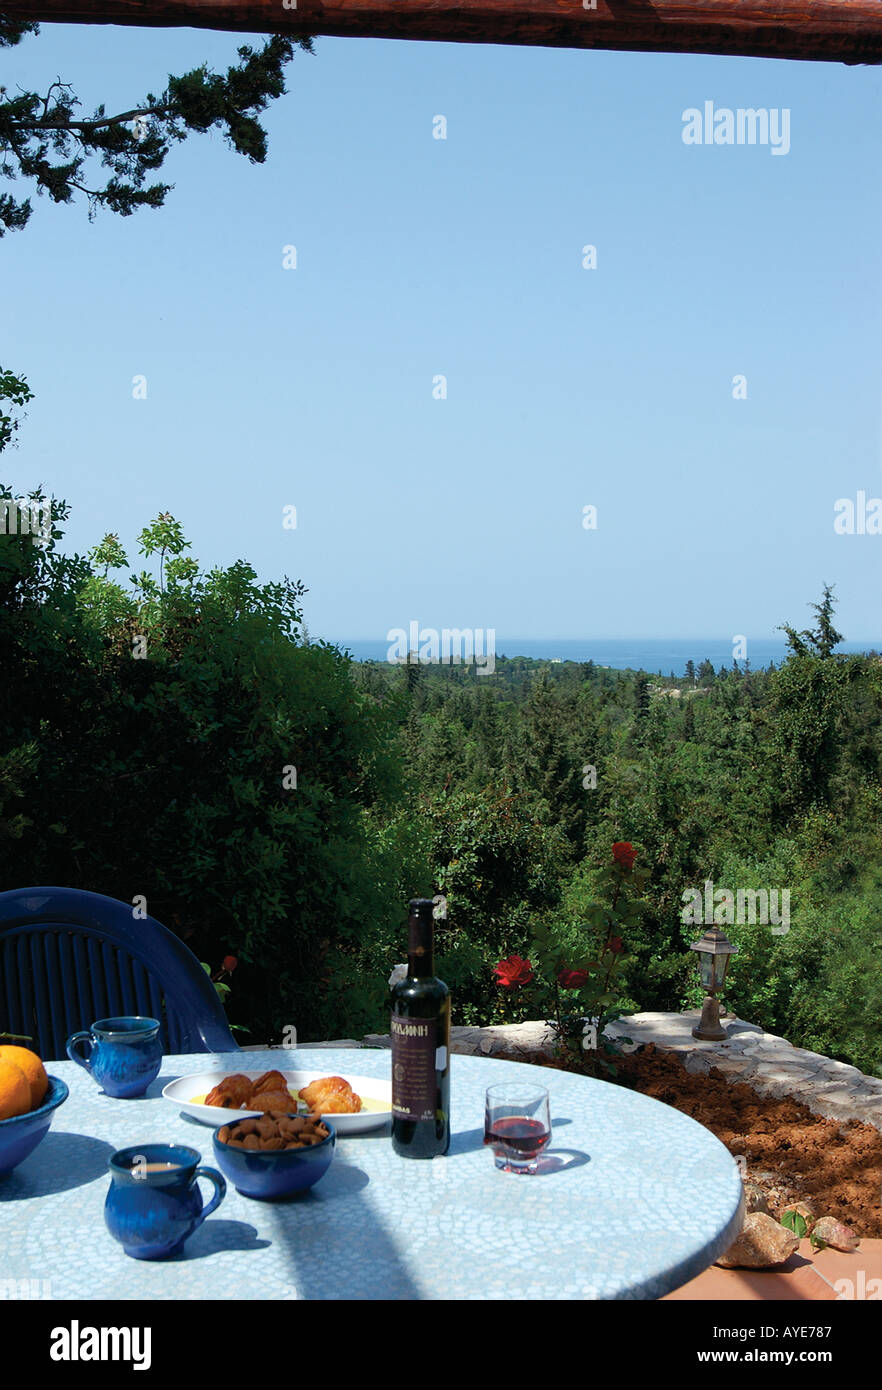 Lunch on the terrace of a holiday villa Stock Photo